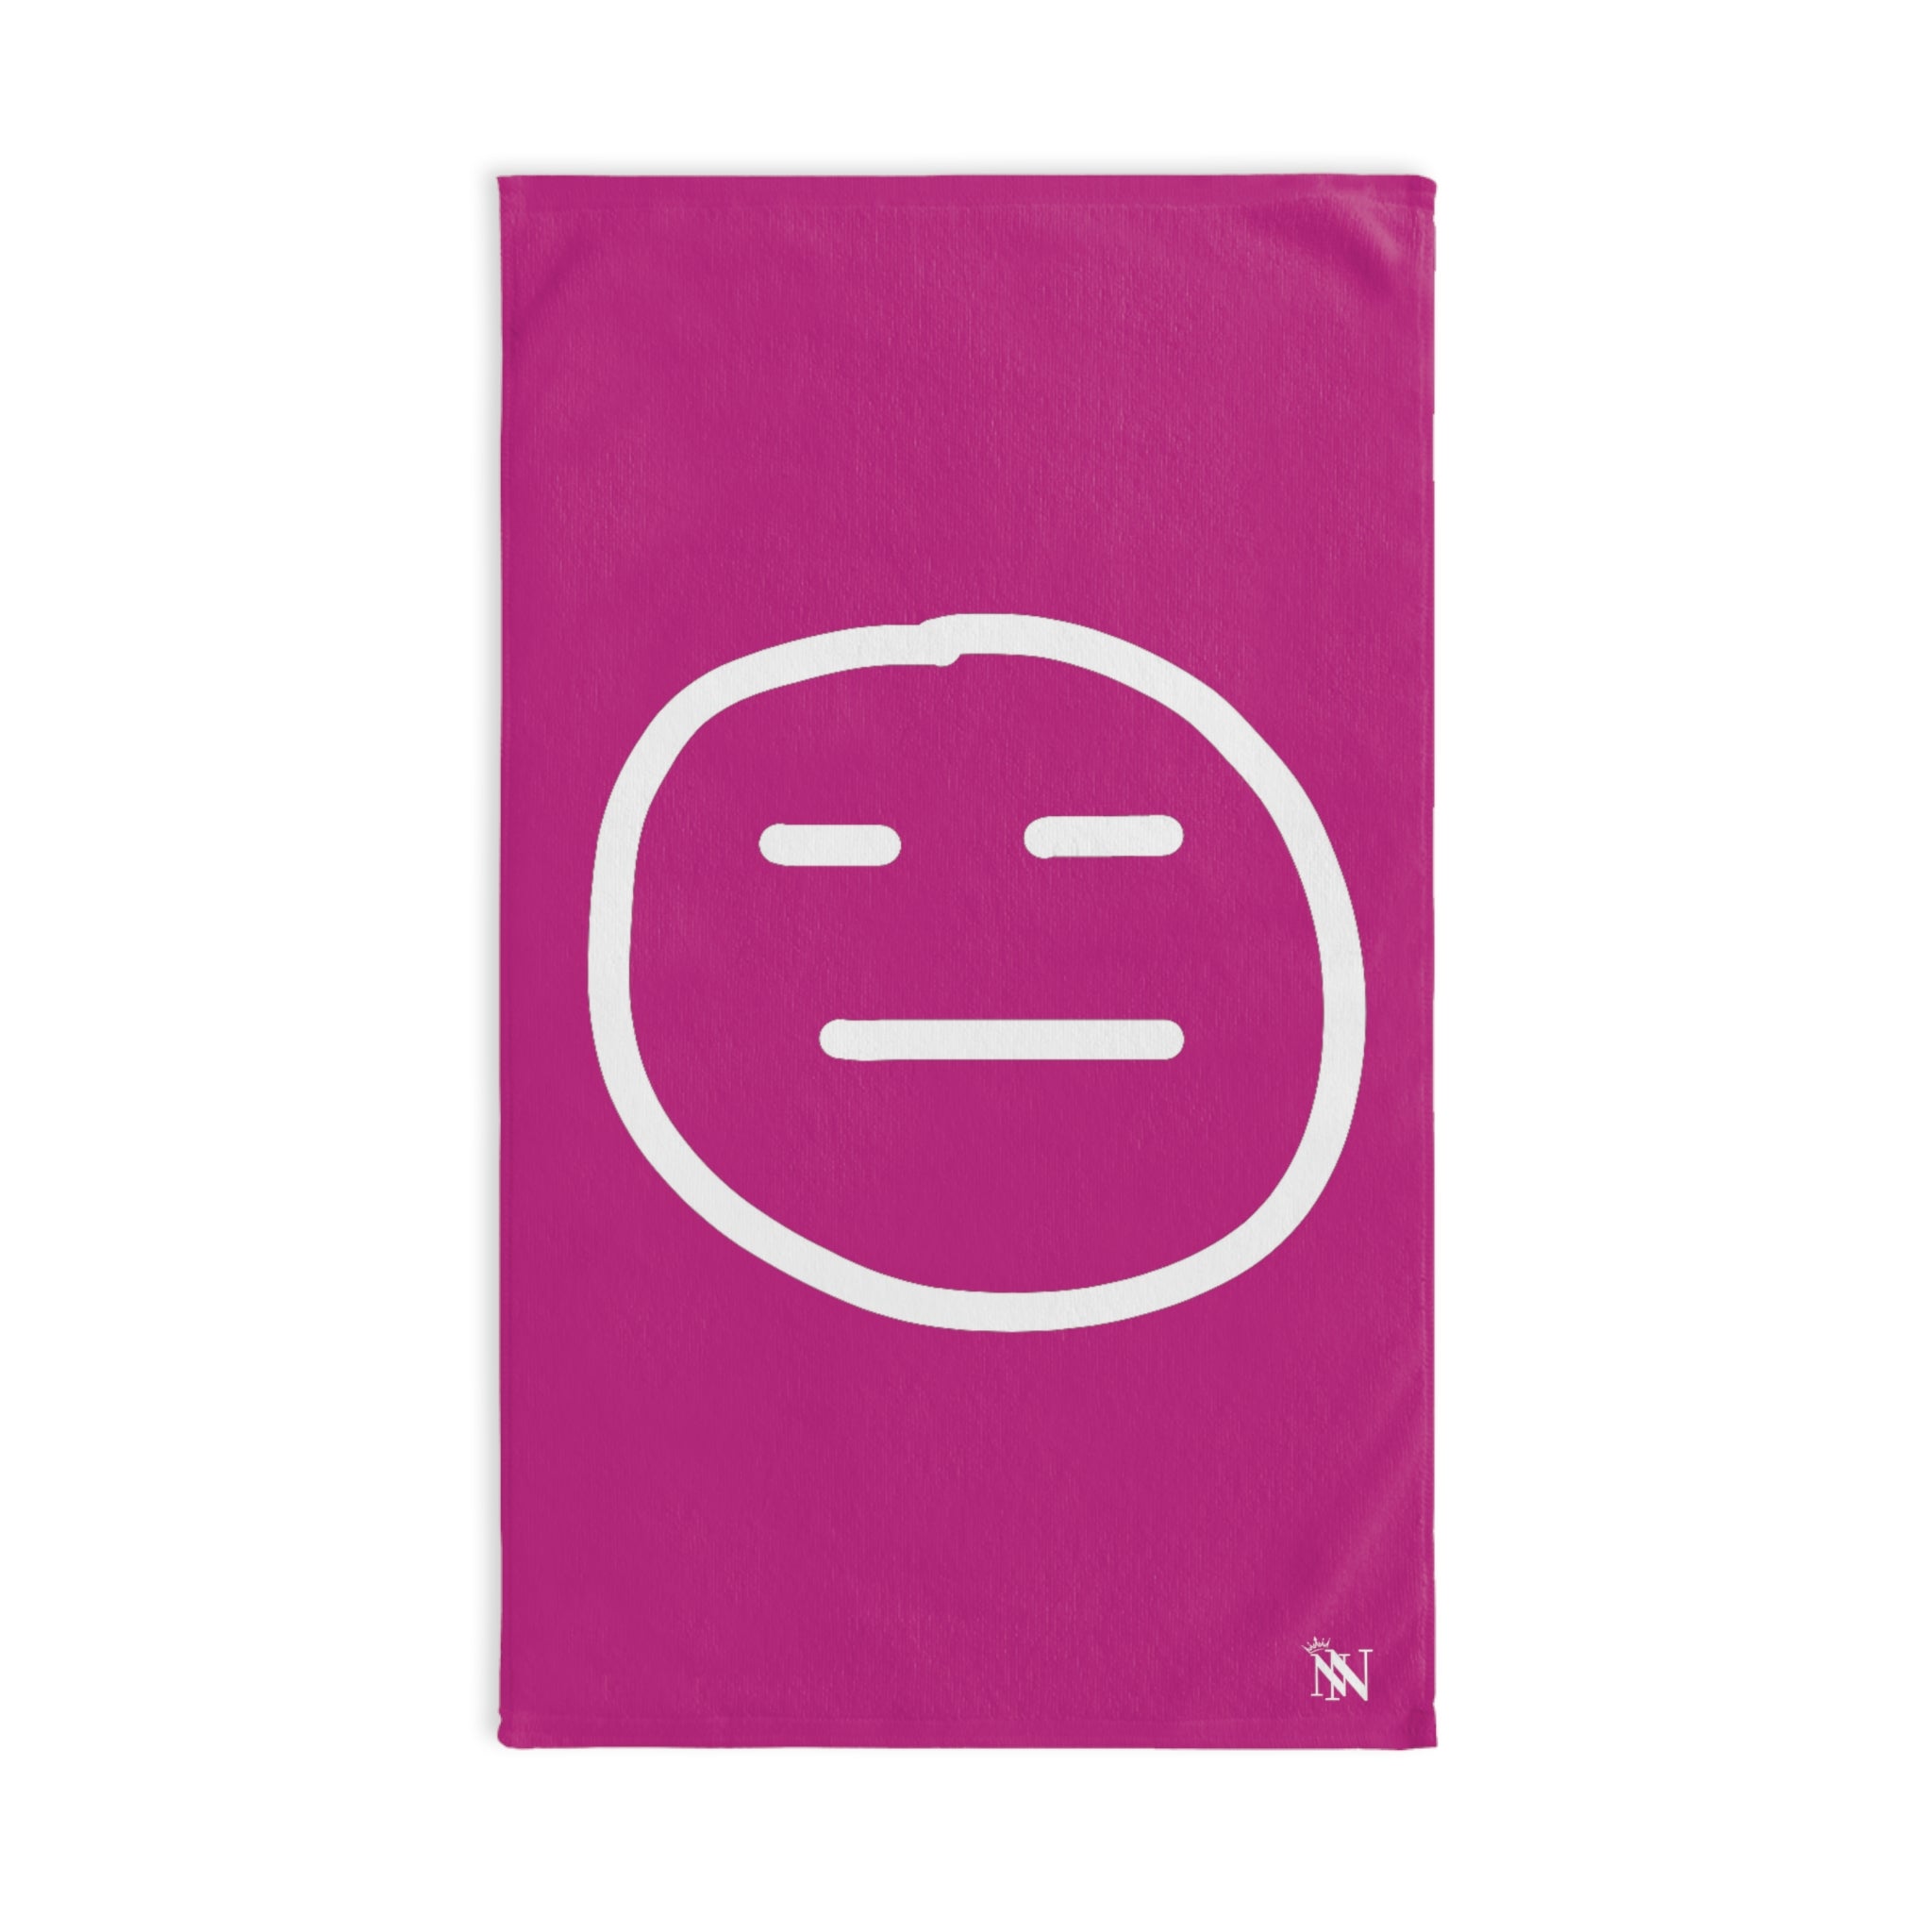 Emoji White Mehr Fuscia | Funny Gifts for Men - Gifts for Him - Birthday Gifts for Men, Him, Husband, Boyfriend, New Couple Gifts, Fathers & Valentines Day Gifts, Hand Towels NECTAR NAPKINS